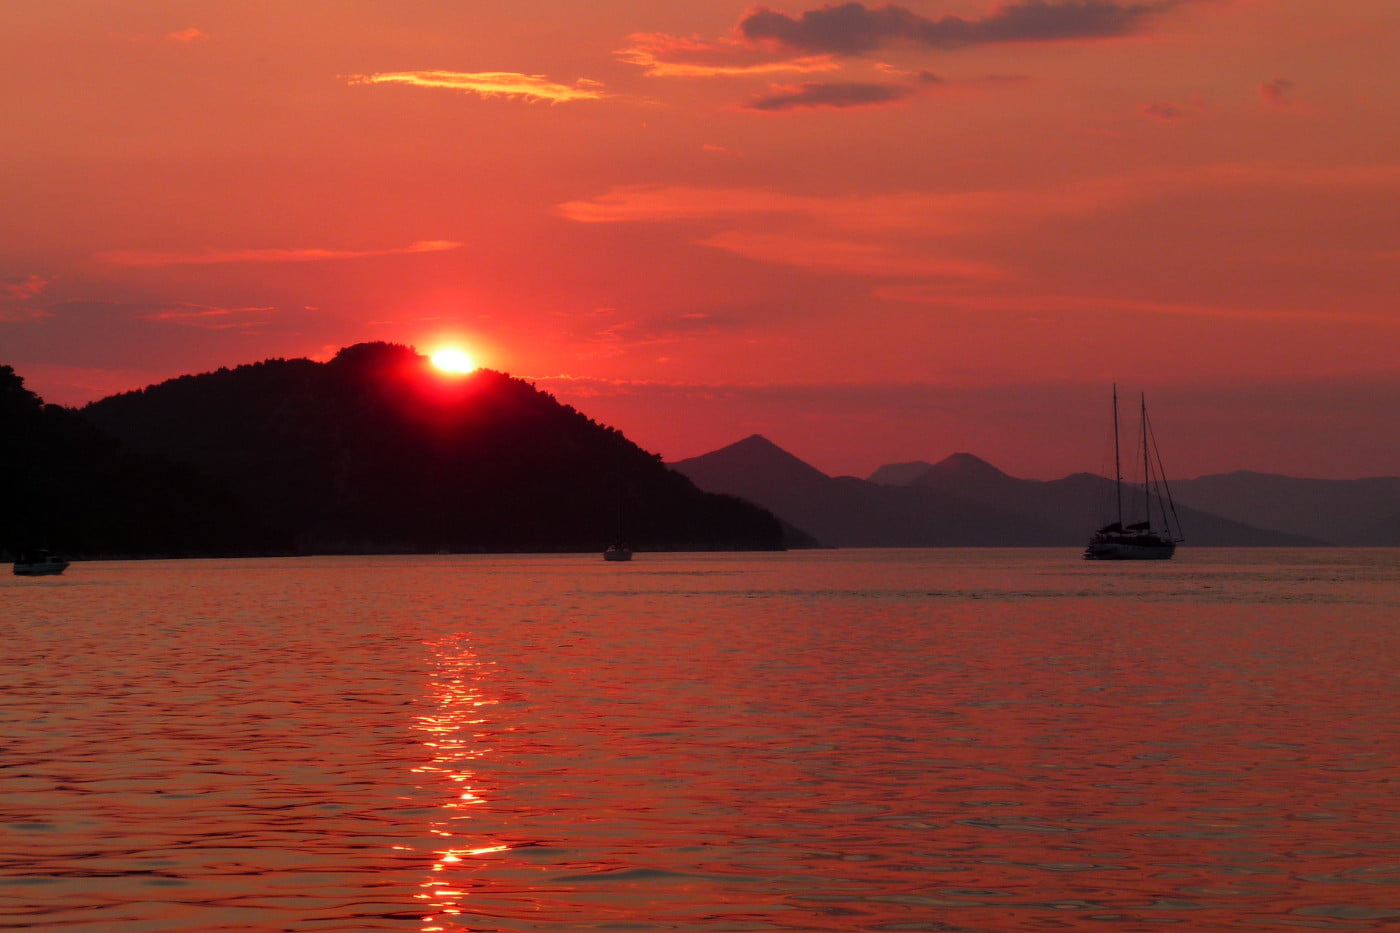 Sunsets at Šipan Island, view of the sun is setting behind Mljet and korcula islands